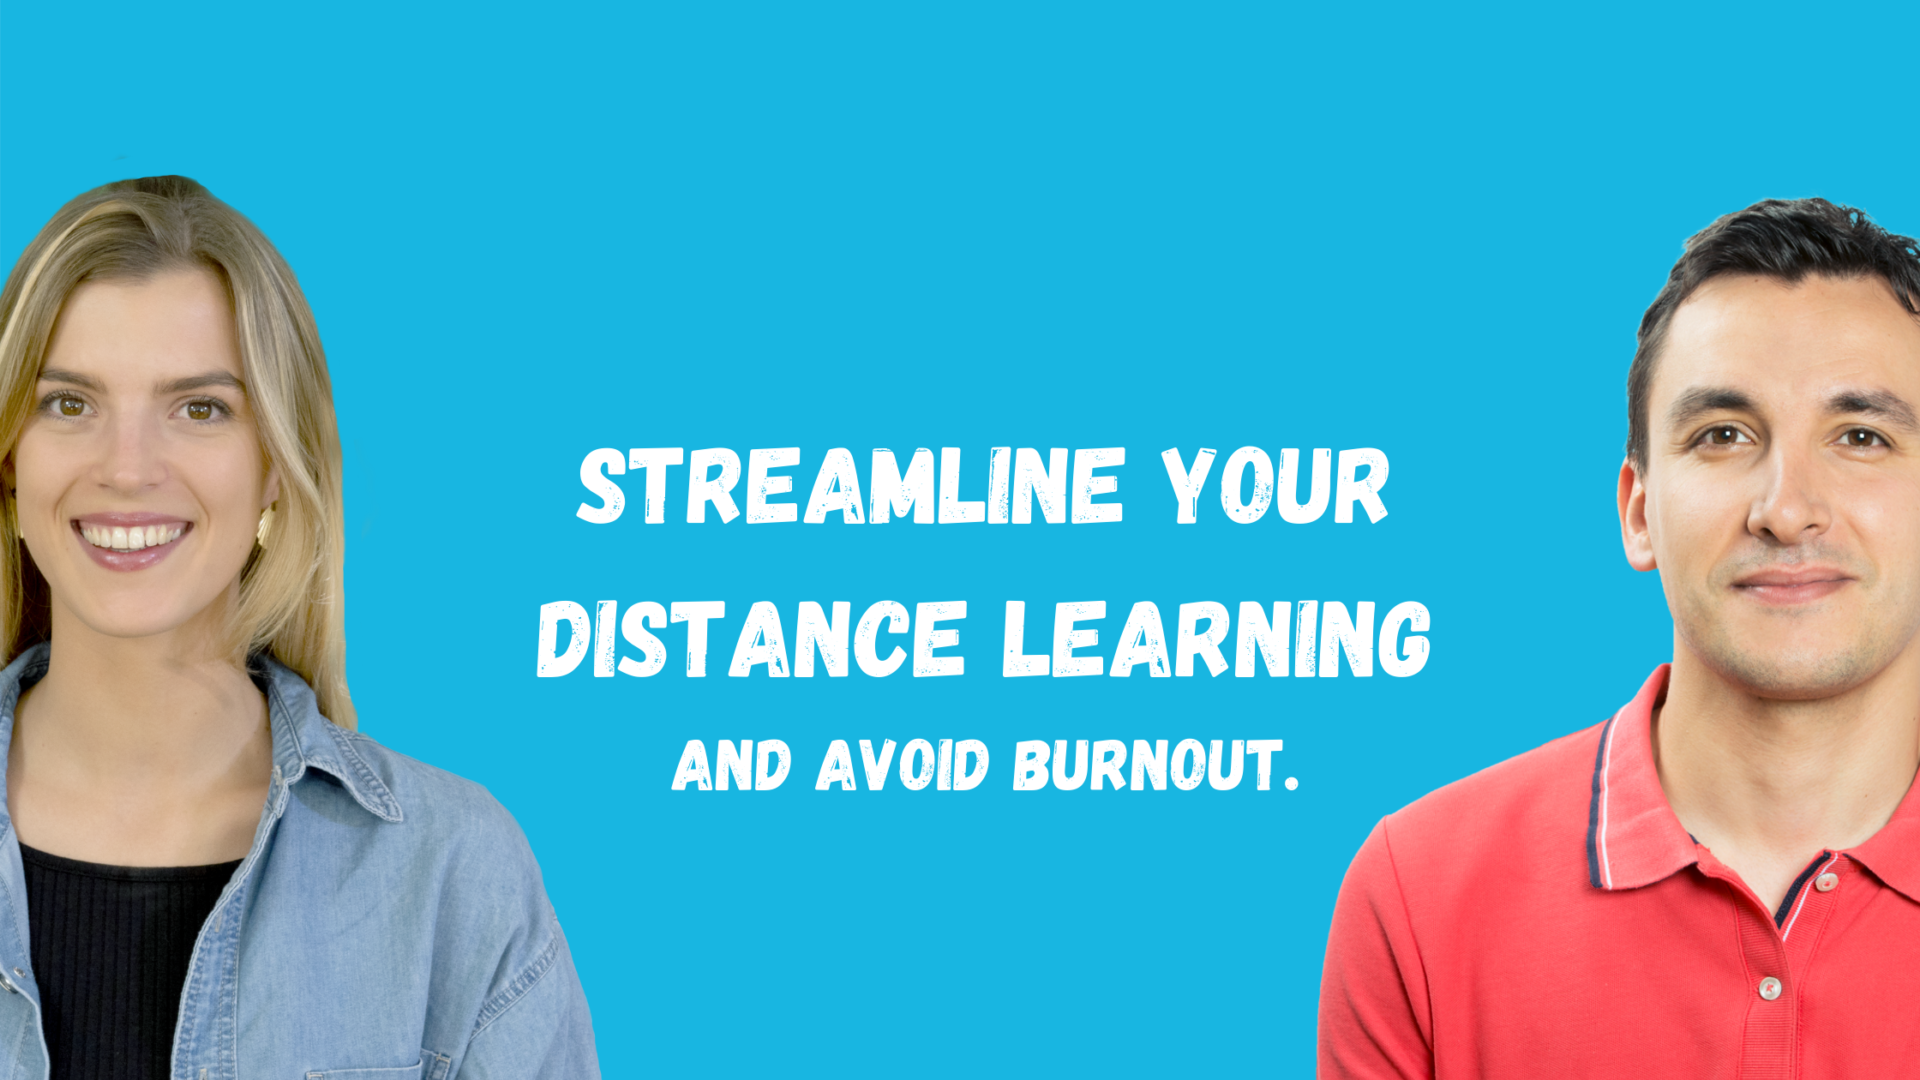 3 steps to streamline your distance learning and avoid burnout.